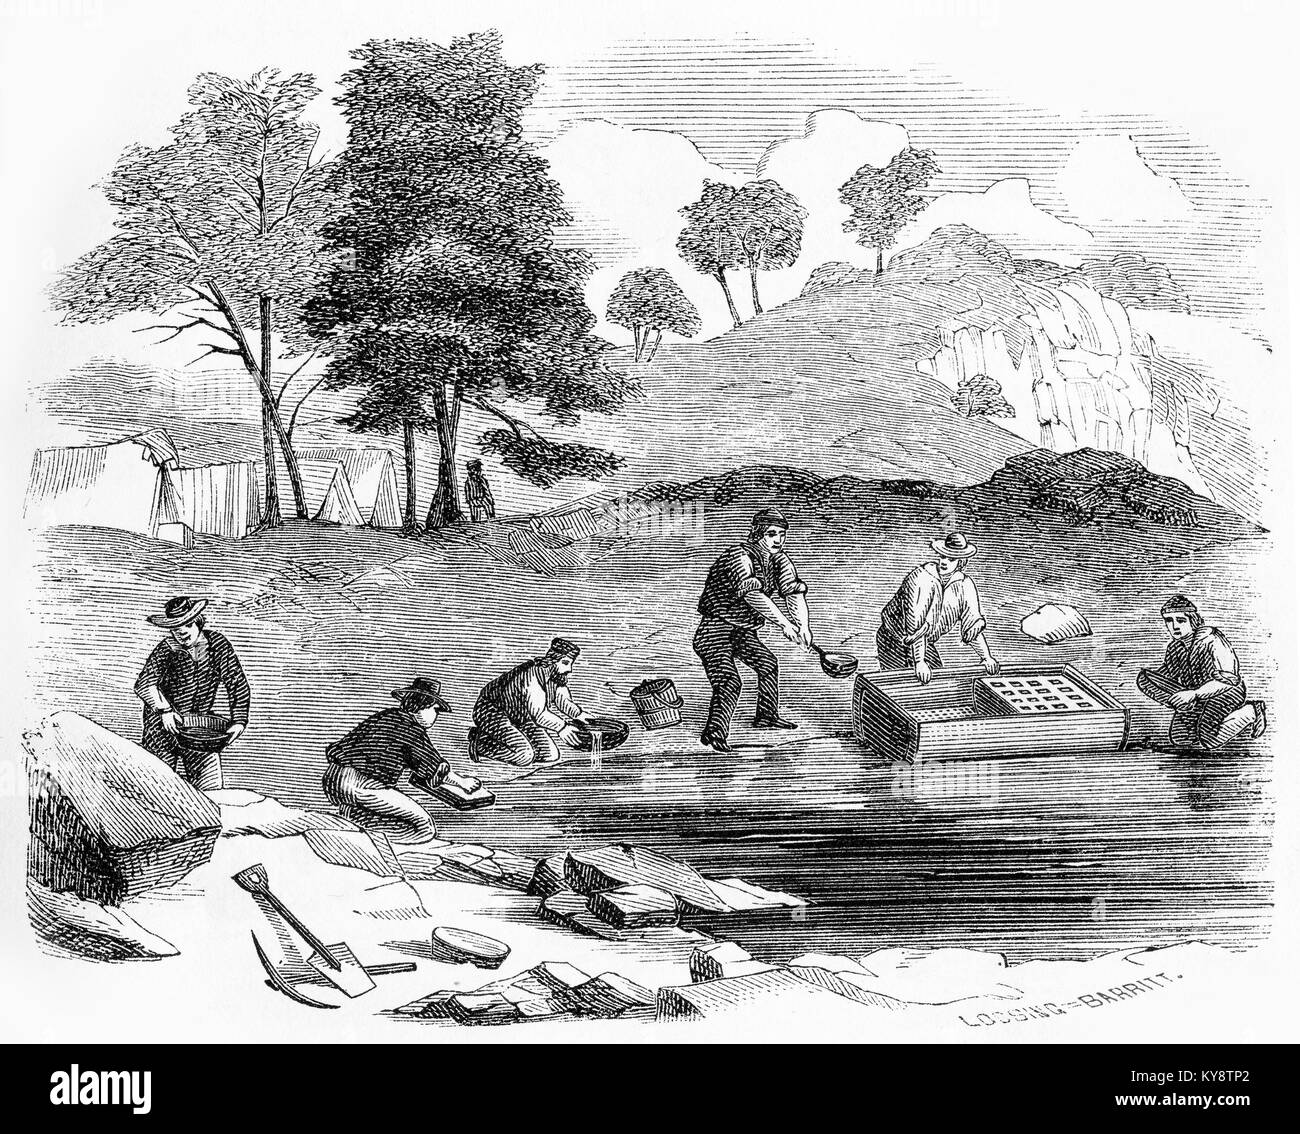 Engraving of prospectors using a rocker or cradle for separating gold from gravel. From an original engraving in the Harper's Story Books by Jacob Abbott, 1854. Stock Photo